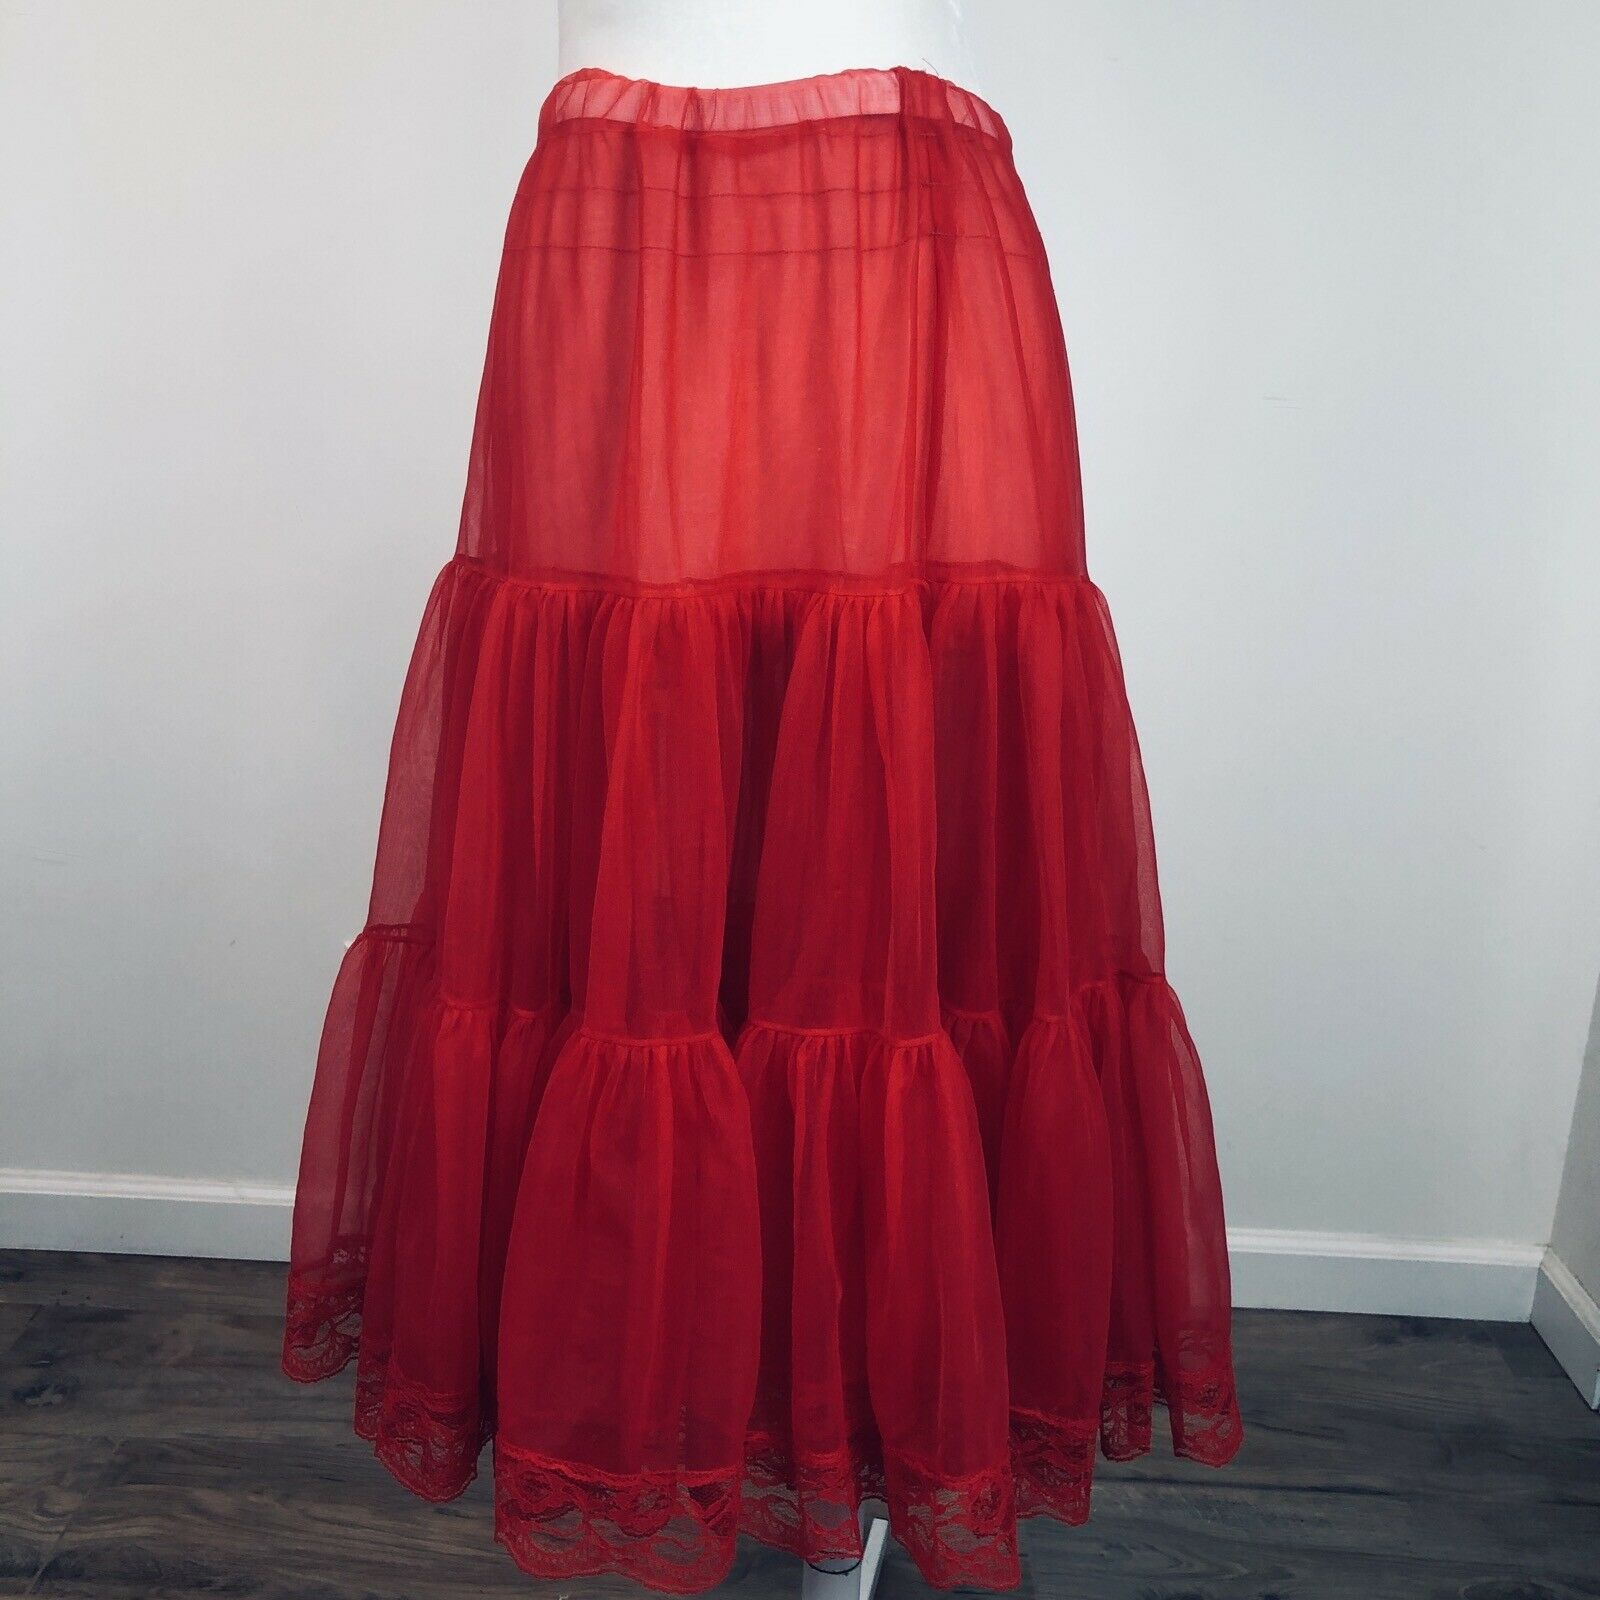 Square Dance Petticoat Long Red Softy 2 Layer Lace Hem Malco Modes(missing Tag)